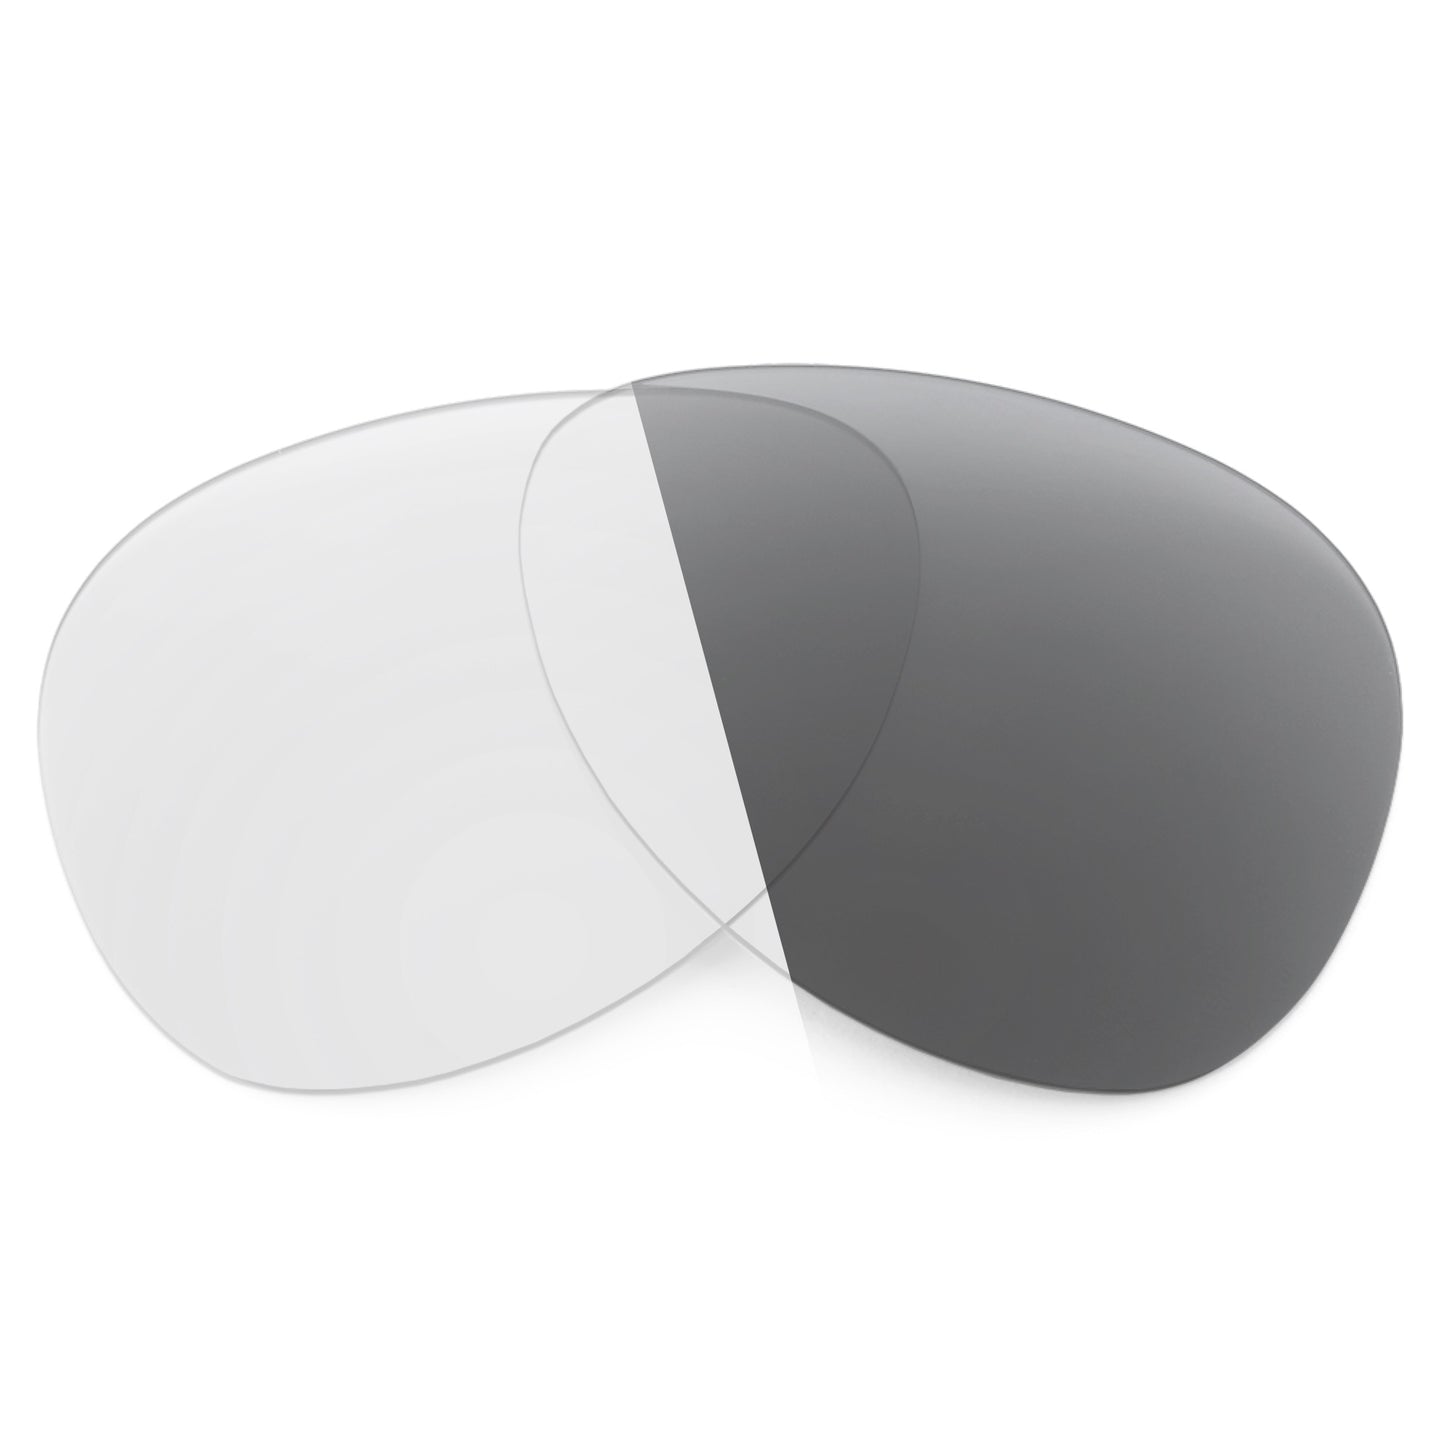 Revant replacement lenses for Ray-Ban RB4189 64mm Non-Polarized Adapt Gray Photochromic